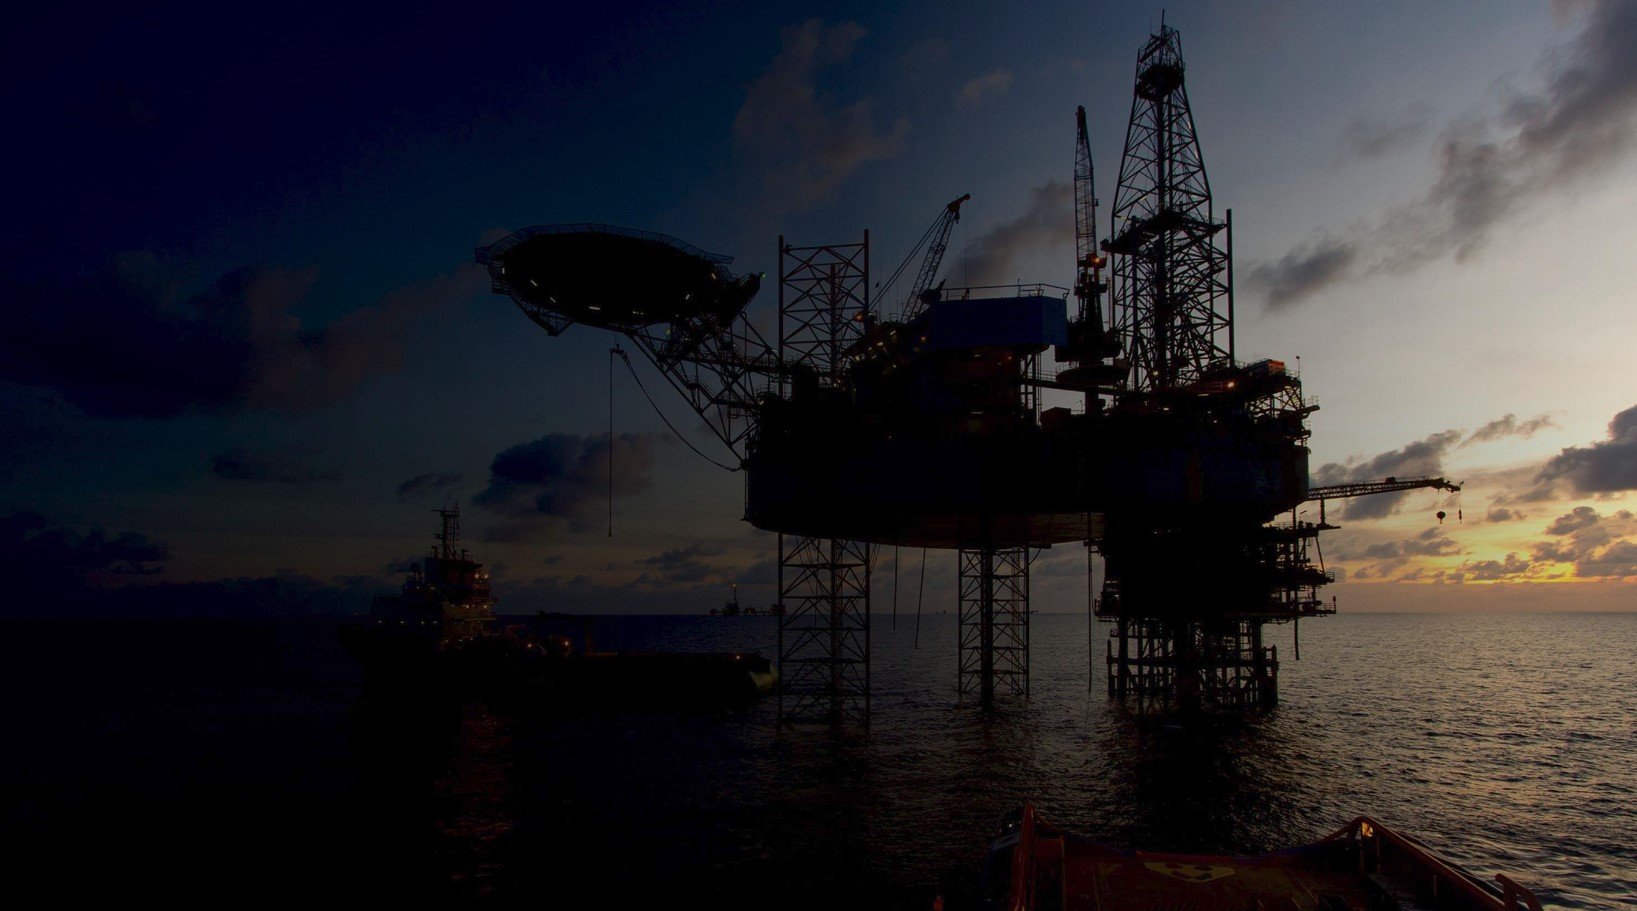 Two jack-up rigs win long-term deals